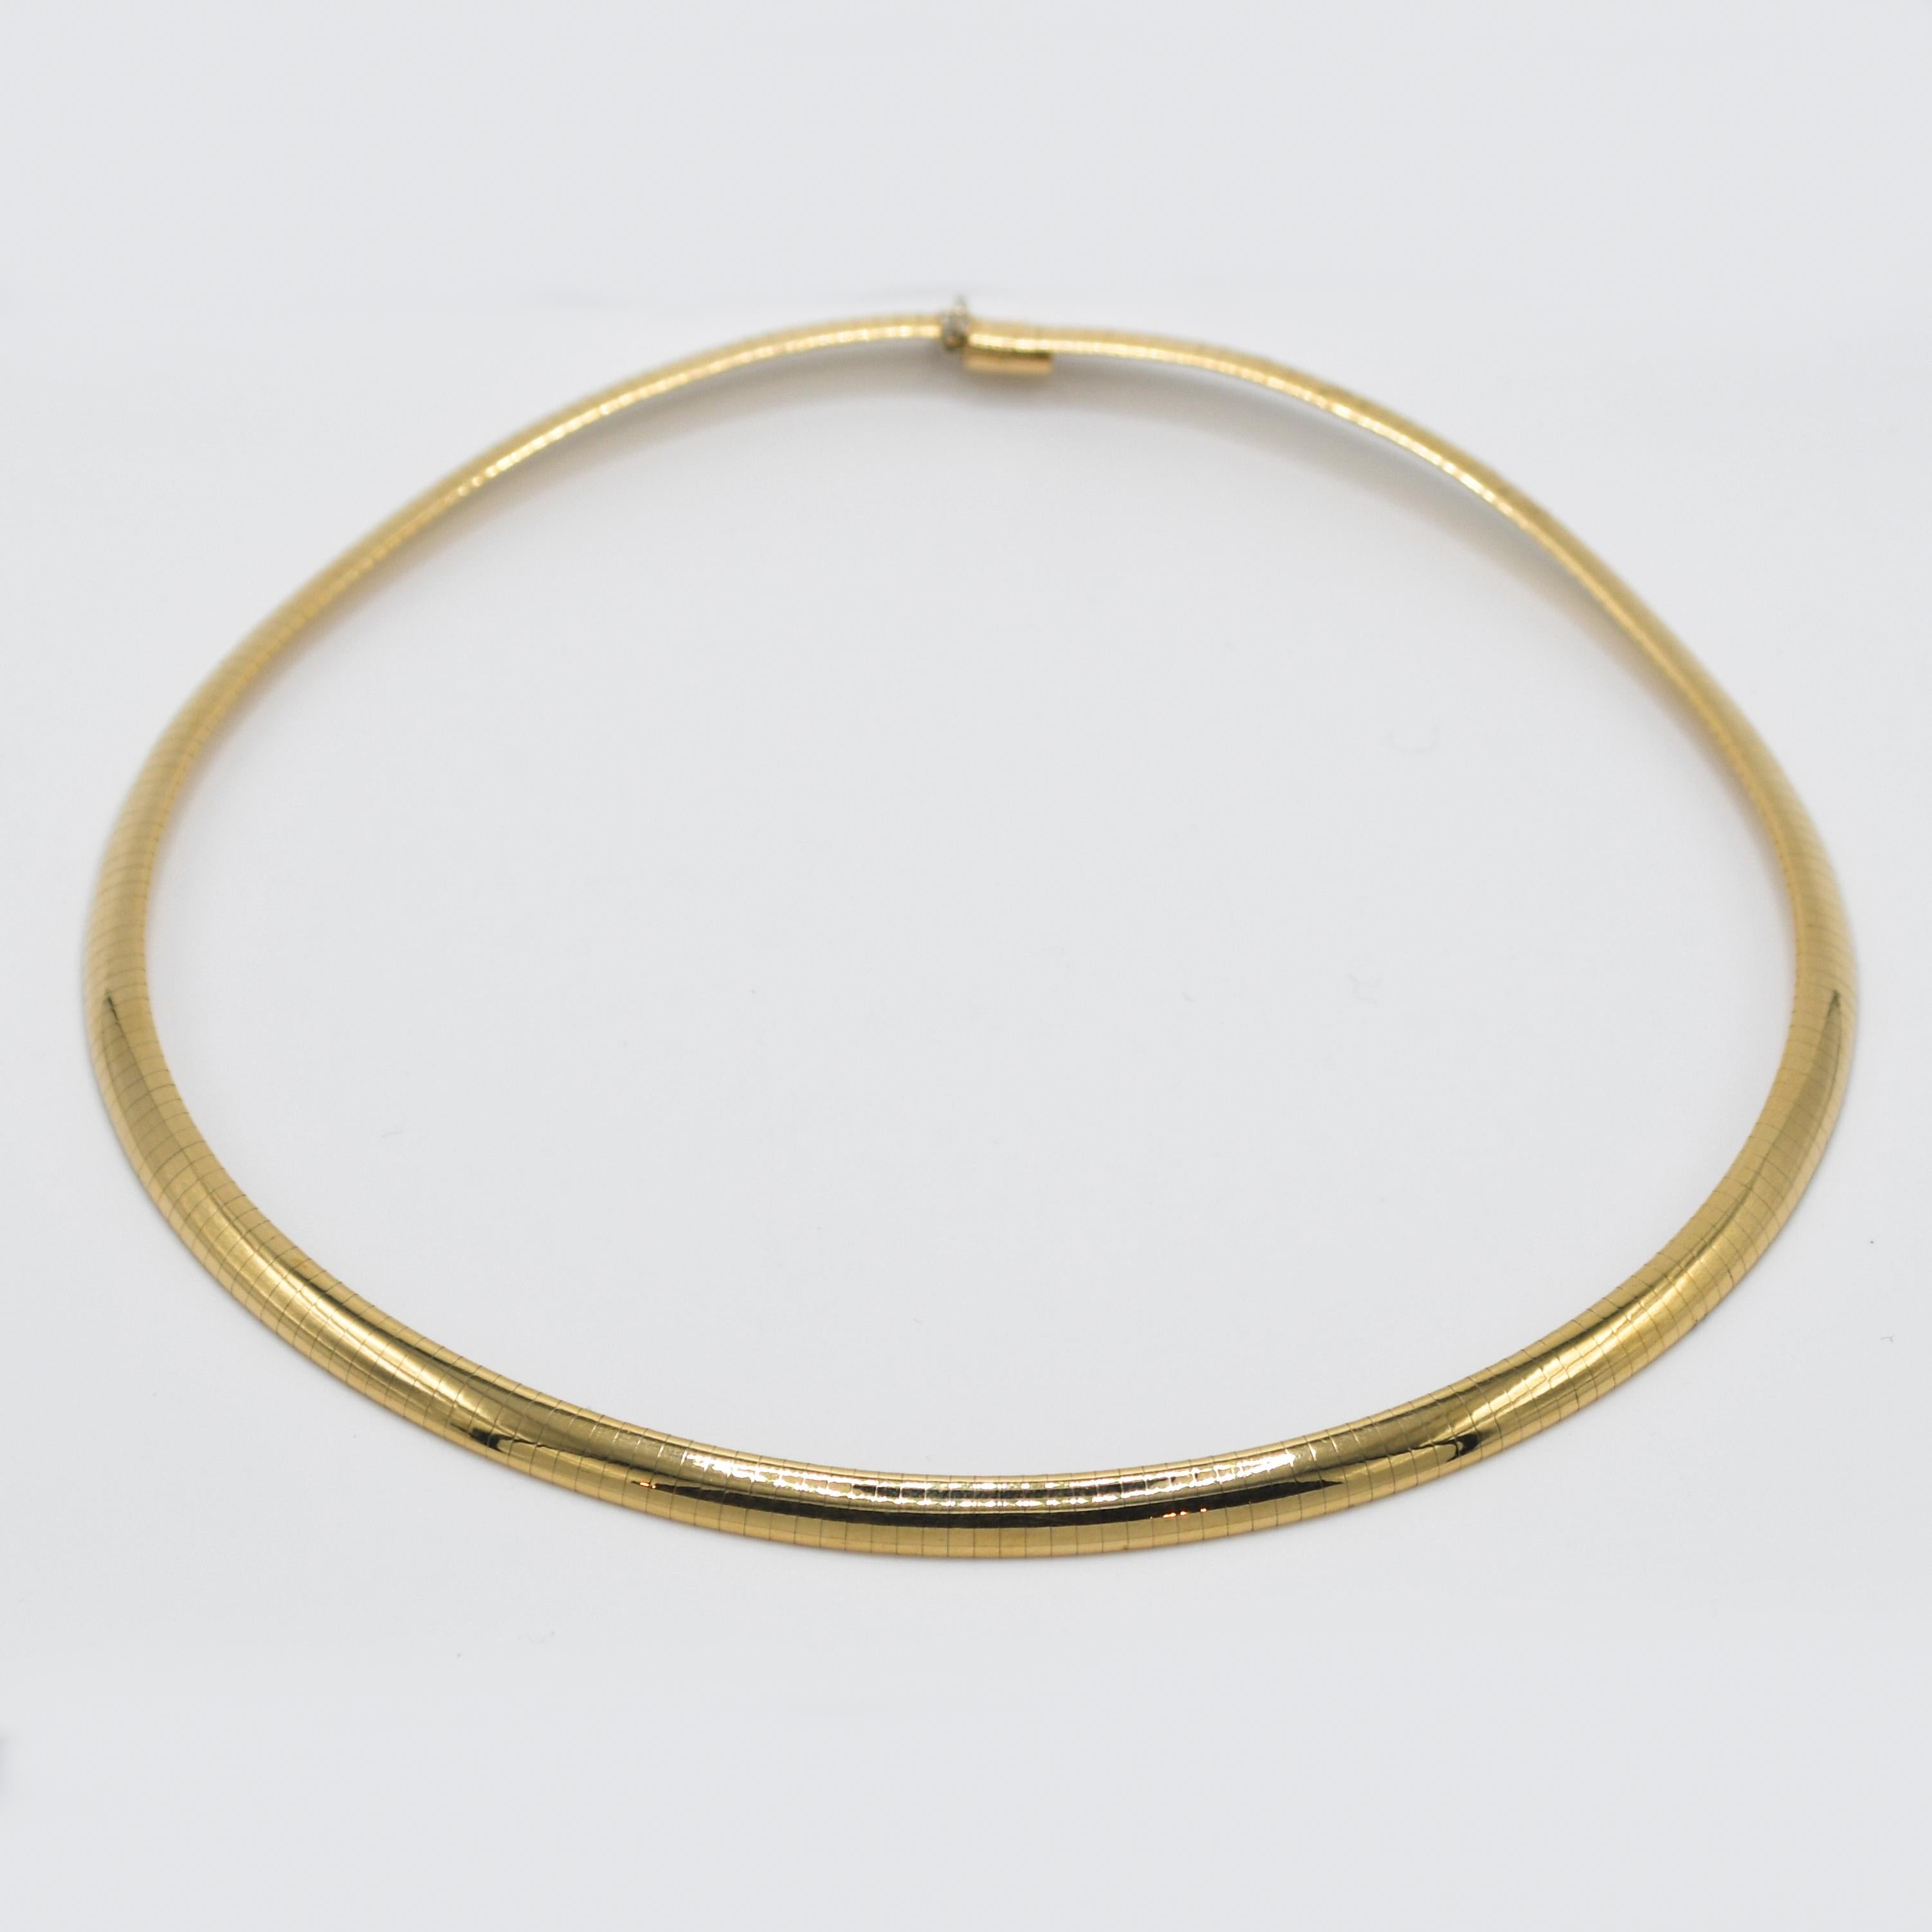 14K Yellow Gold Ladies Omega Necklace, 27.2g
14k yellow gold omega link necklace.
Stamped 14k and weighs 27.2 grams.
The necklace measures 16 inches long and 6mm wide.
Overall, very good condition.